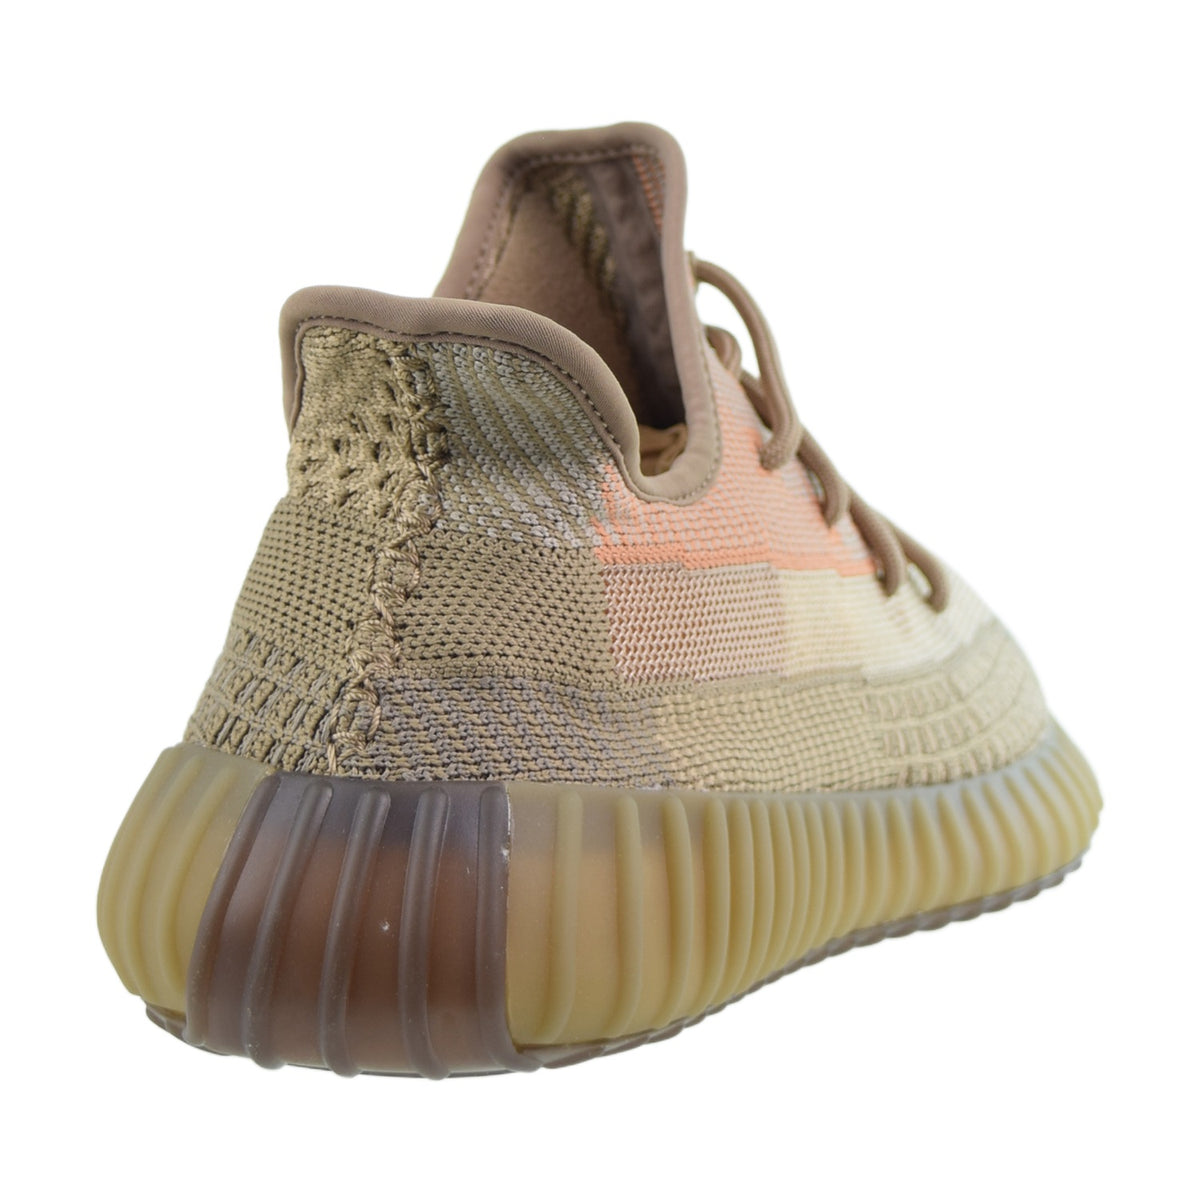 Adidas Yeezy Boost 350 V2 Men's Shoes Sand Taupe